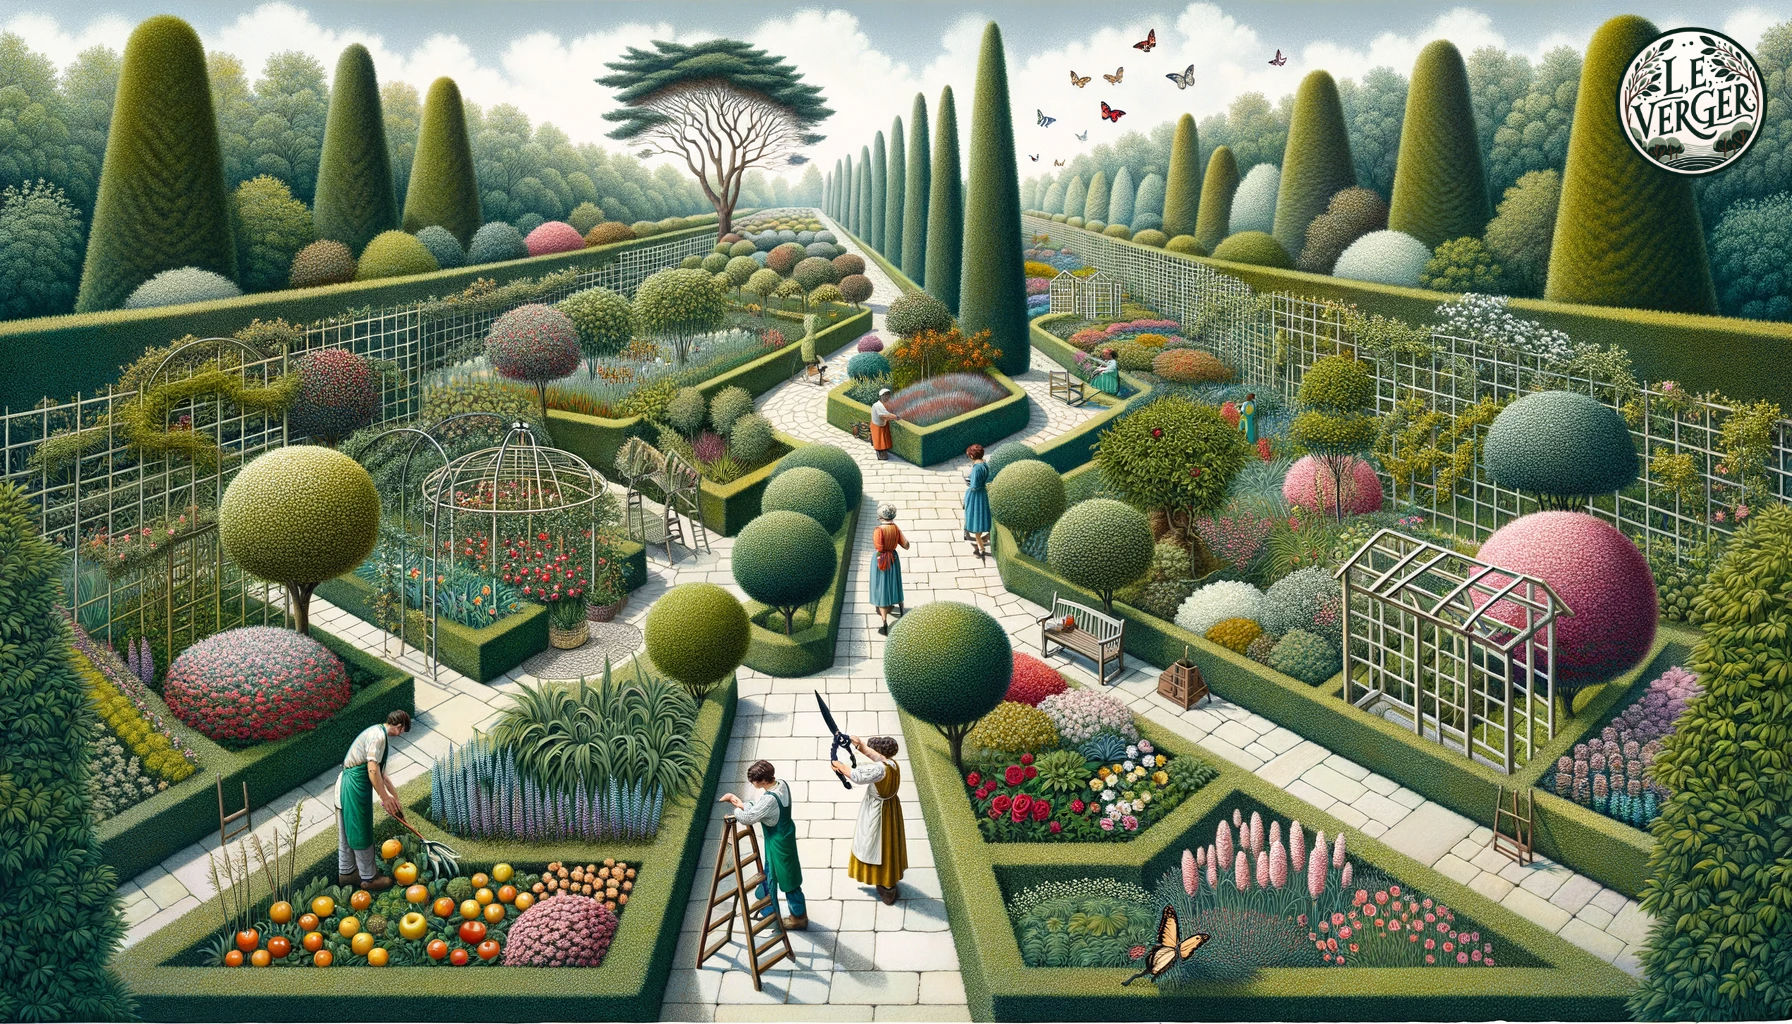 Illustration, wide aspect: A panoramic view of a botanical garden, with clear pathways guiding through various sections. The first section showcases shrubs and hedges being shaped by a man with shears. The next section has trees, including apple and cherry fruit trees, with a woman on a ladder pruning higher branches. Further along, a colourful flowerbed attracts butterflies, with a gardener attending to the flowers and perennials. The final section displays climbers wrapping around trellises and conifers standing tall, with two gardeners collaborating on their care.